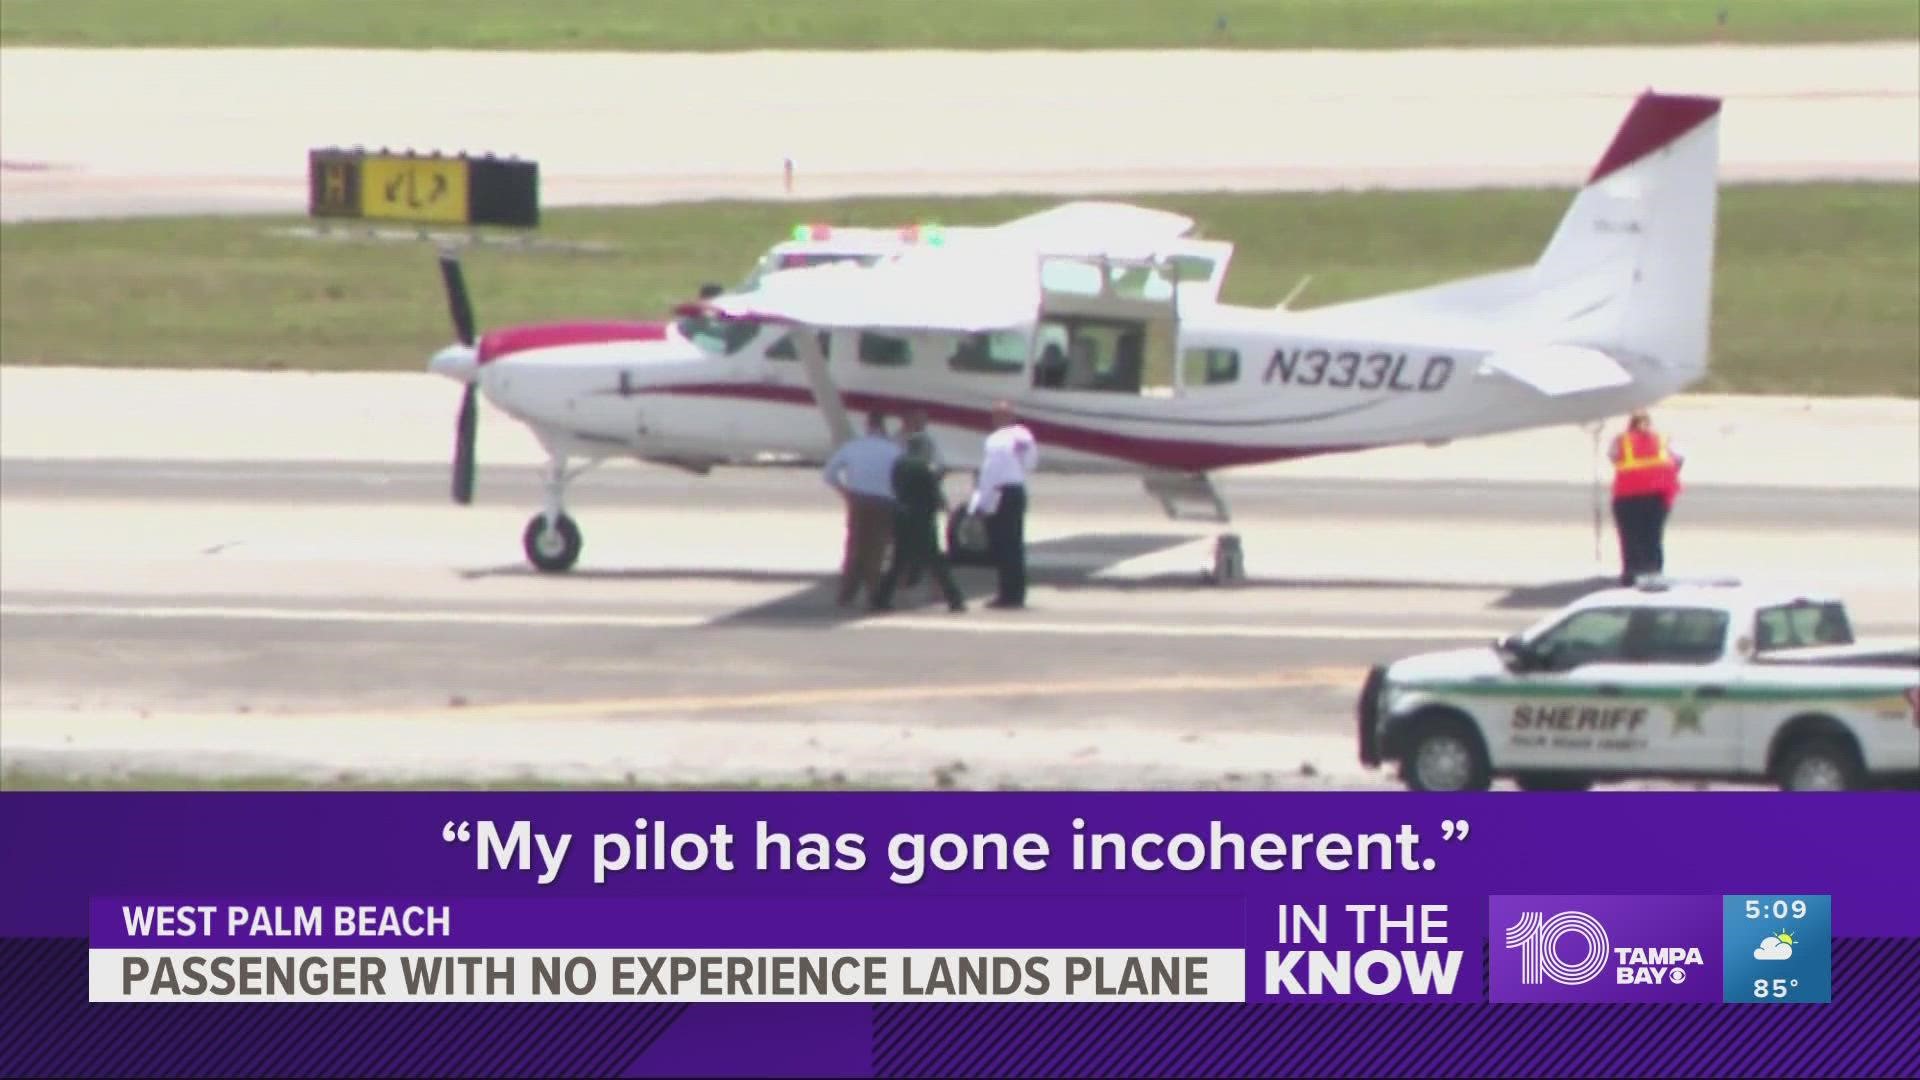 Despite having no flight experience, the passenger was able to take over and successfully land the plane after the pilot had a medical emergency.